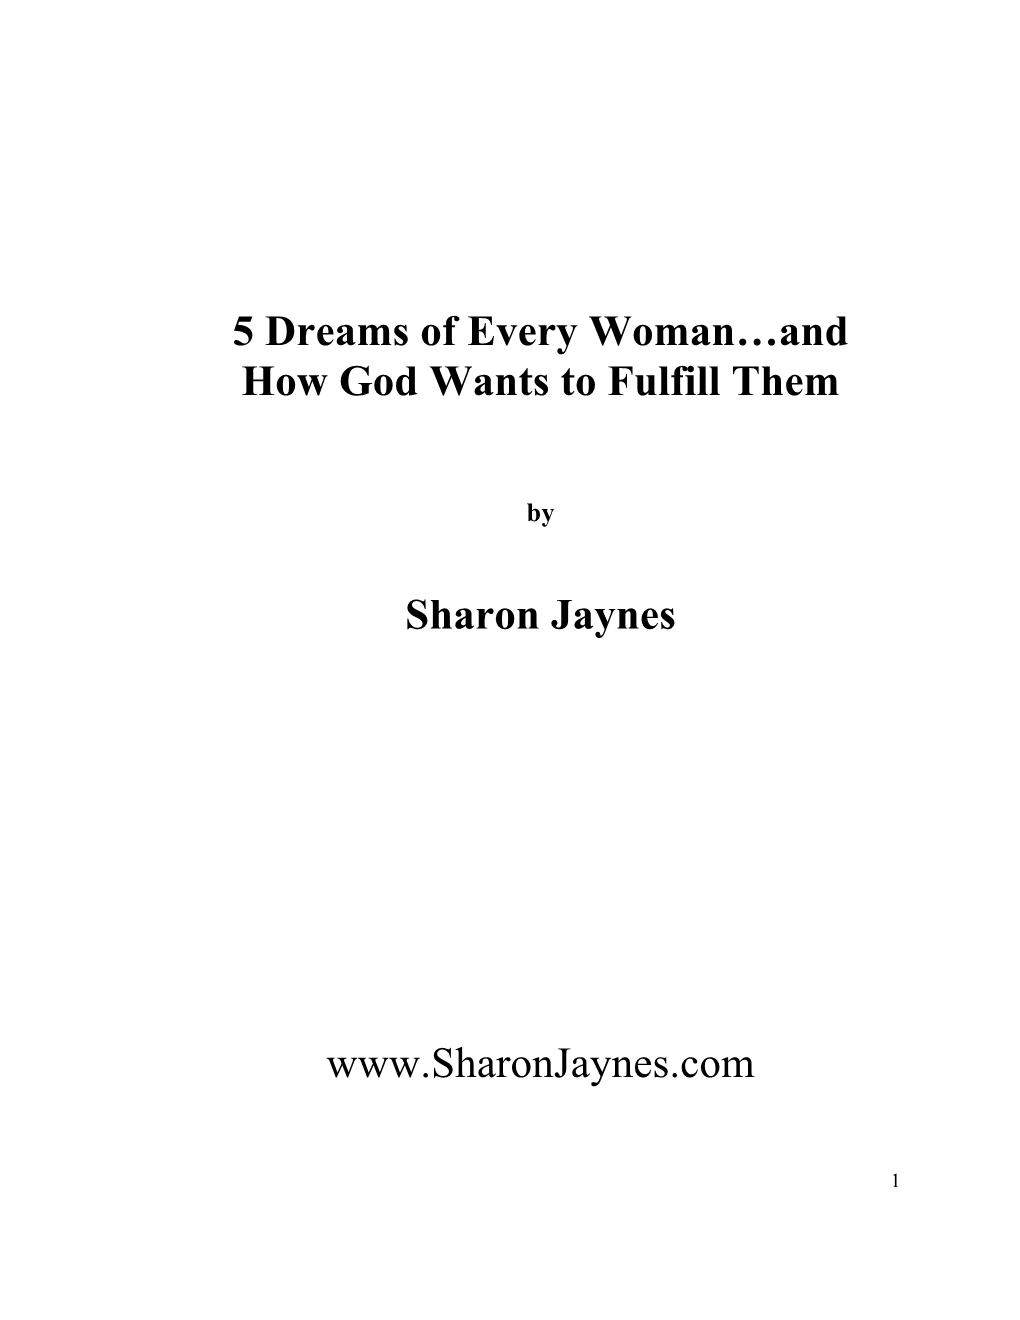 5 Dreams of Every Woman…And How God Wants to Fulfill Them